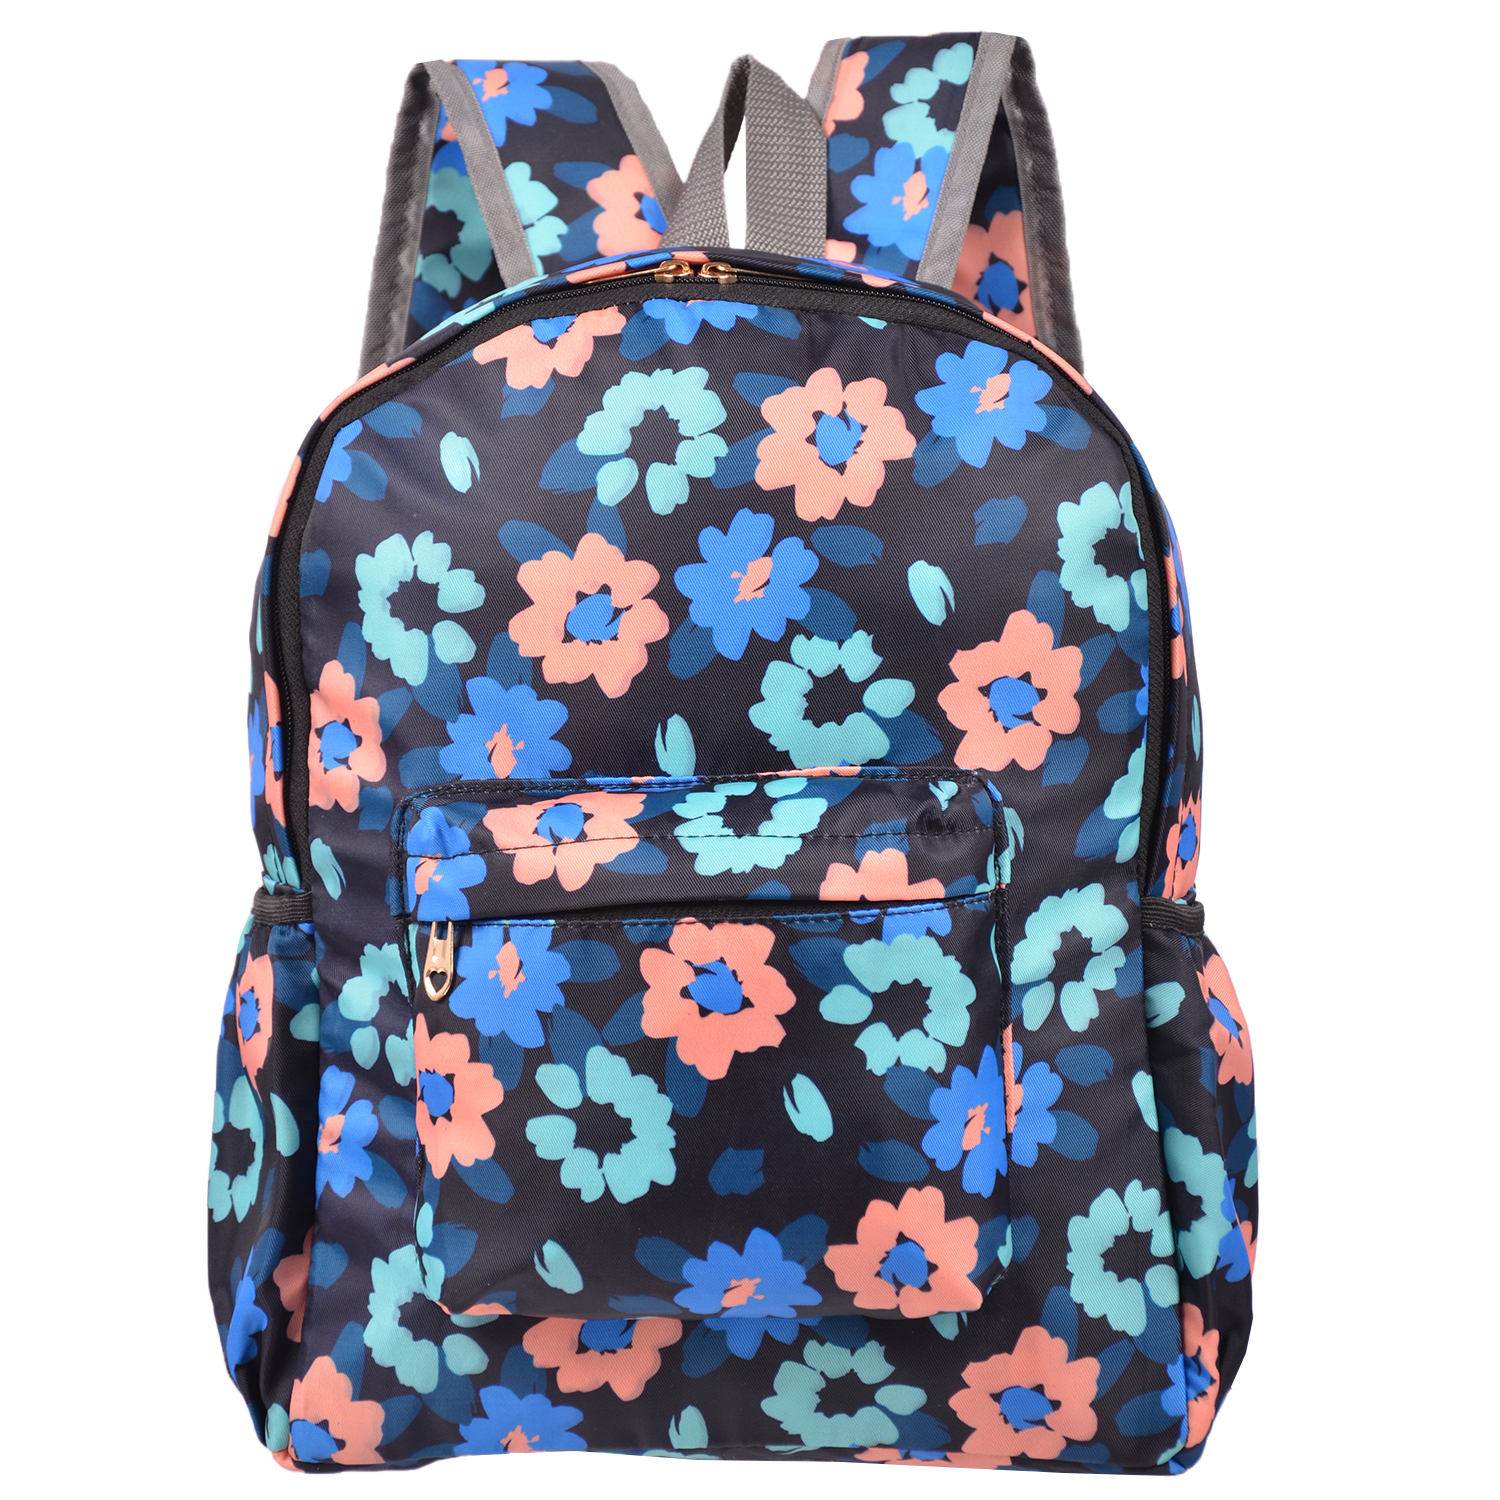 RoshanBags_FANCY 9L WOMEN FASHION BACKPACK WITH POUCH A0230 OXBORD BLUE